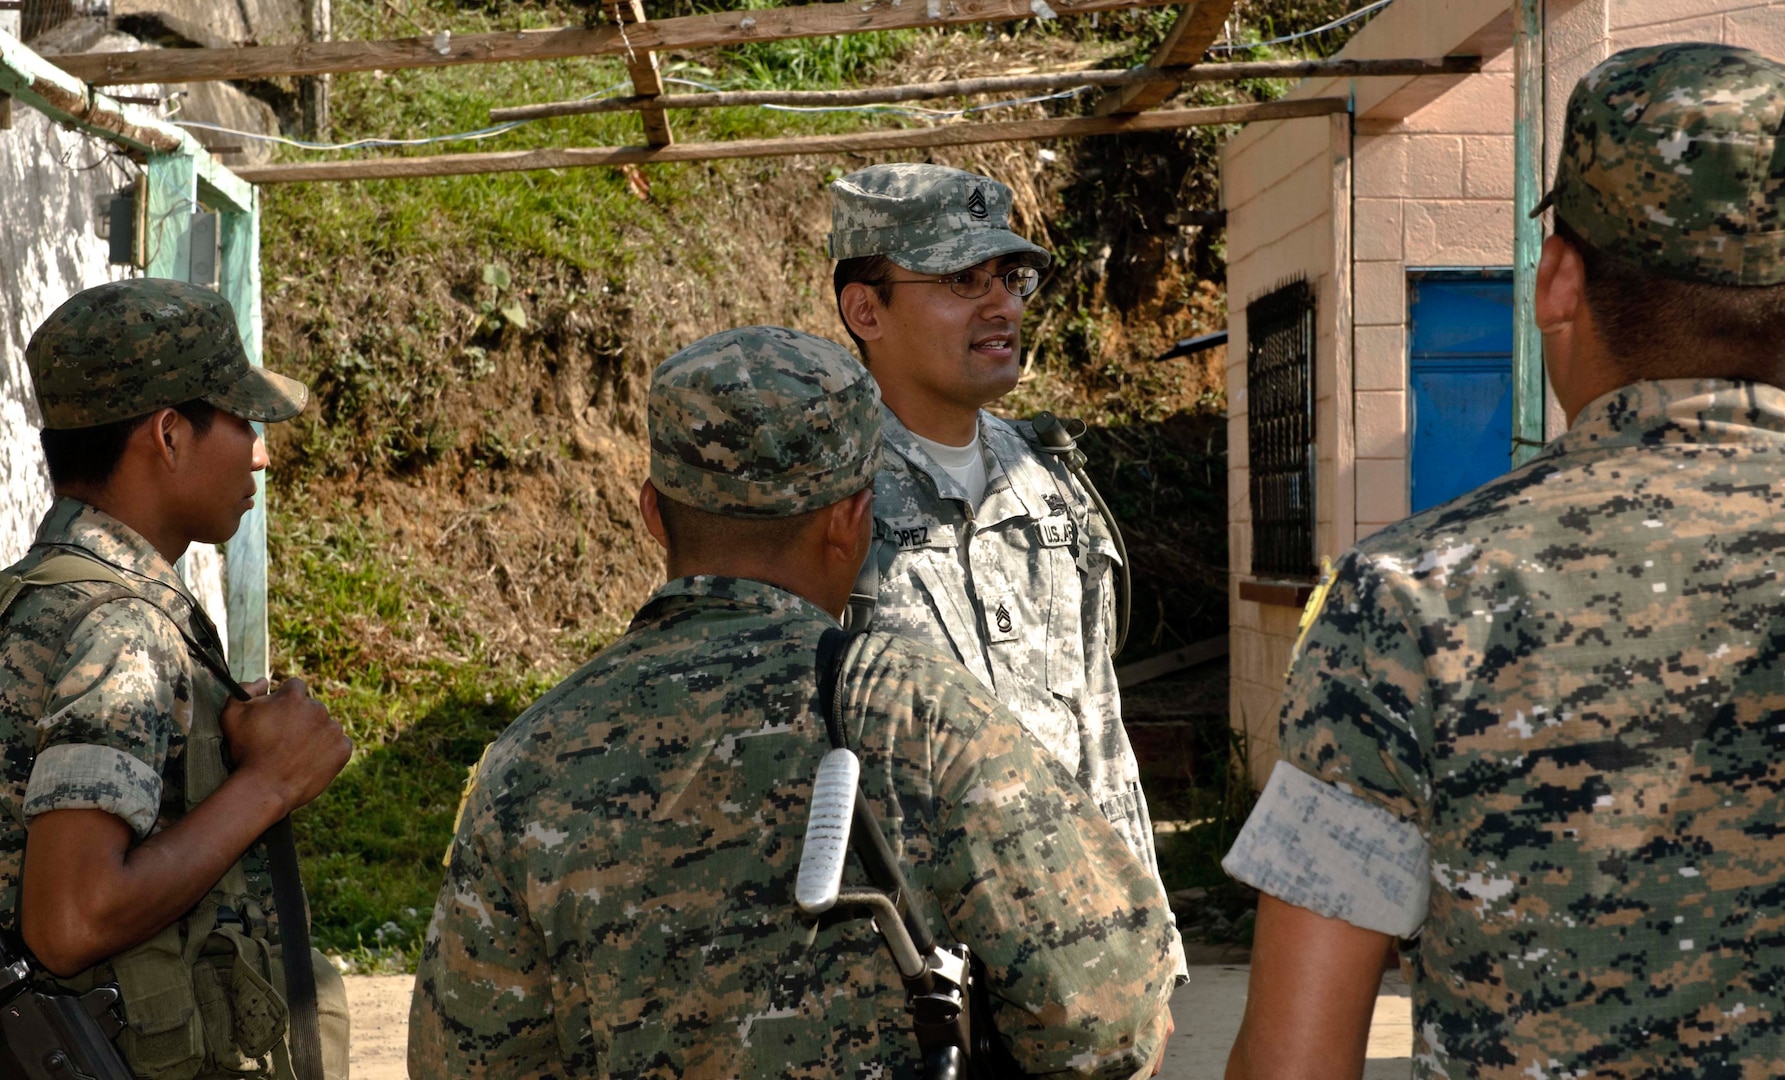 Sgt. 1st Class Angel Lopez, with the Utah Army National Guard's 300th Military Intelligence Brigade, discusses the upcoming day with Guatemalan security forces while taking part in Beyond the Horizons 2012. Sgt. Lopez volunteered to go to Guatemala and utilizes his linguistic skills to communicate and coordinate with Guatemalan military and civilian personnel.